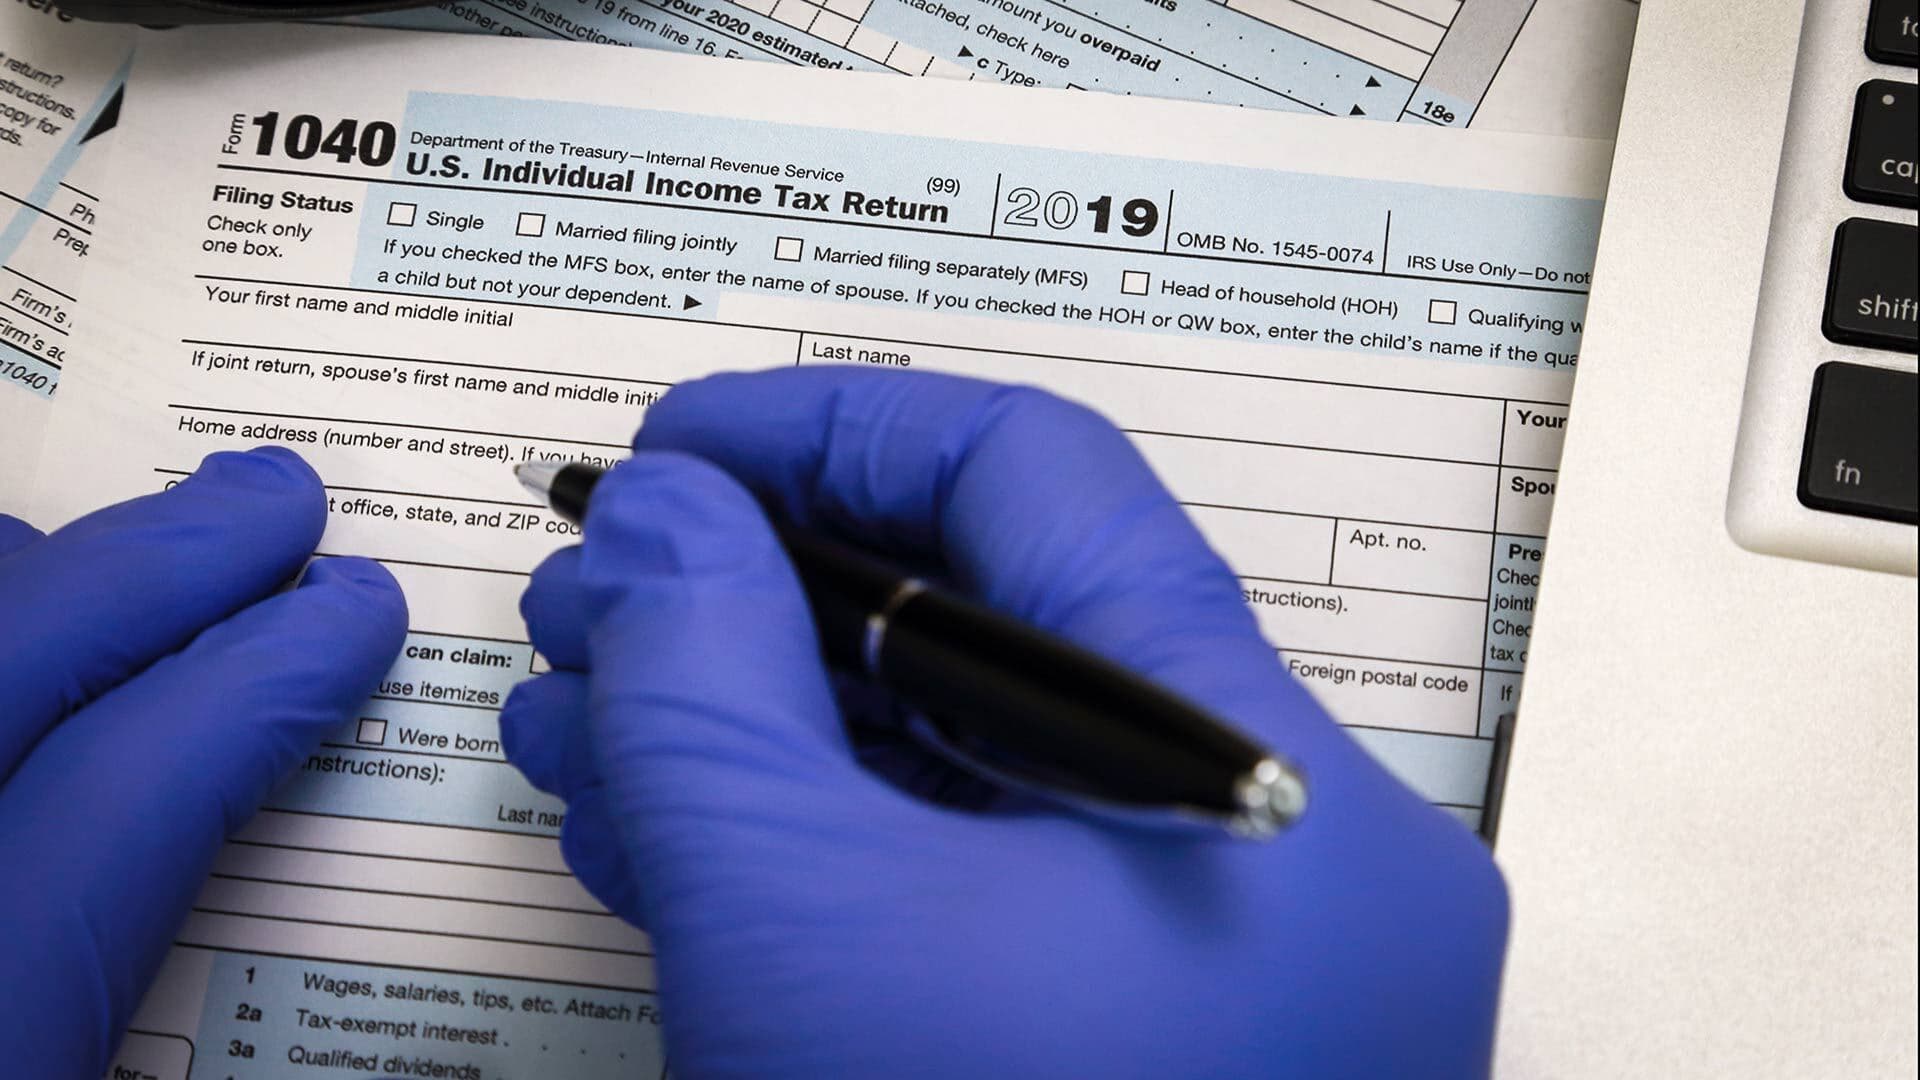 Gloved hands fill out tax form